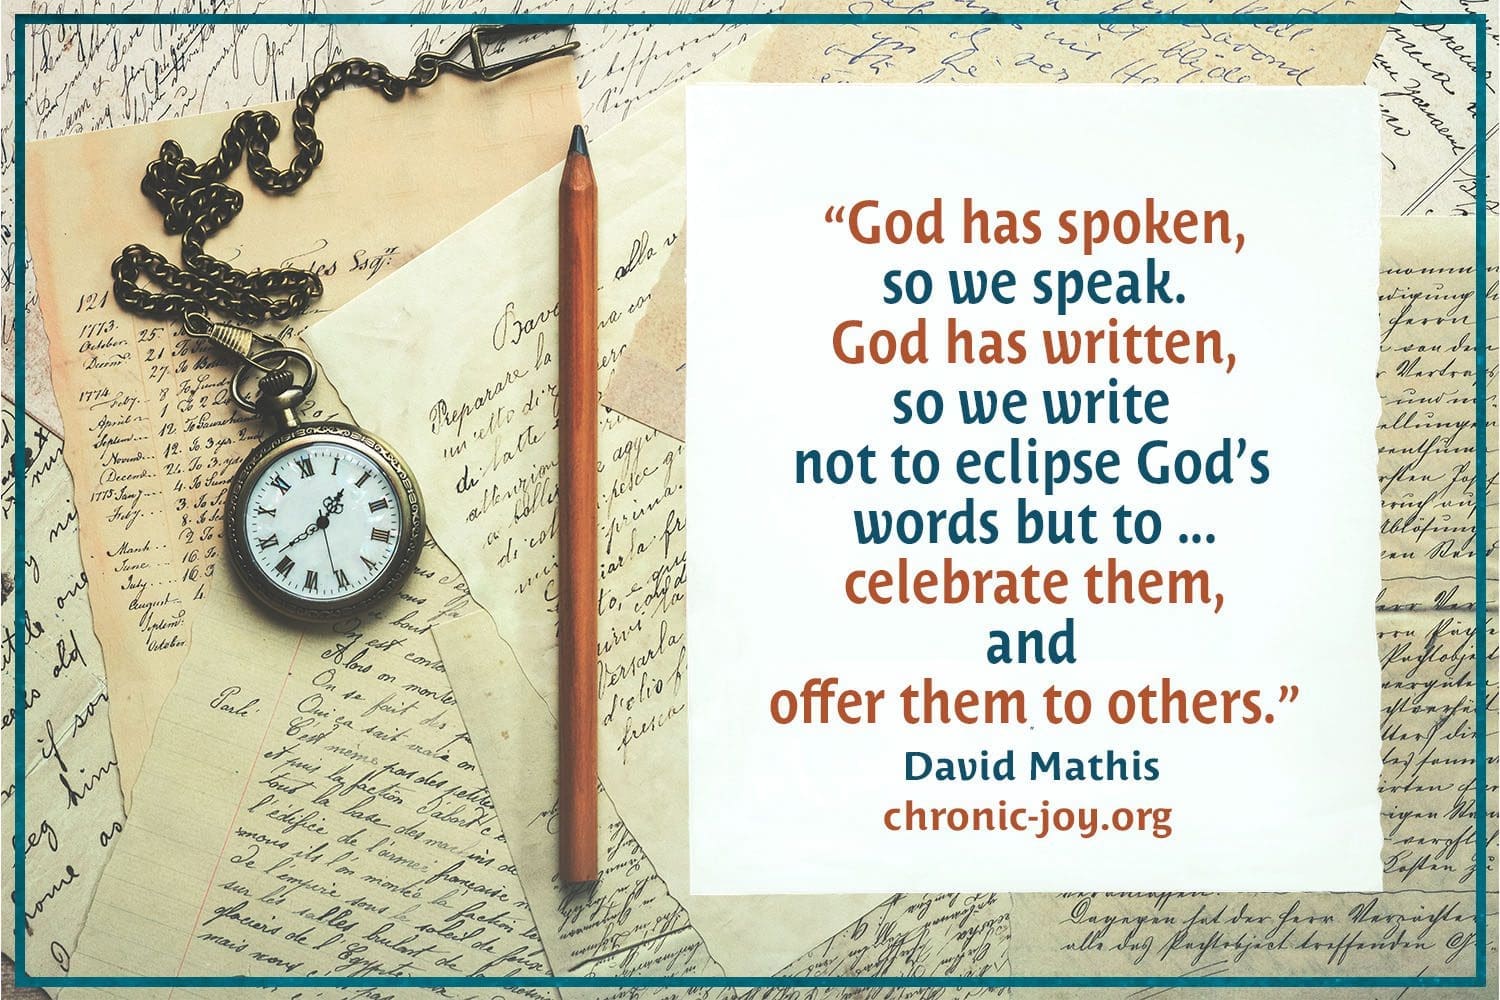 “God has spoken, so we speak. God has written, so we write not to eclipse God’s words but to ... celebrate them, and offer them to others.” David Mathis